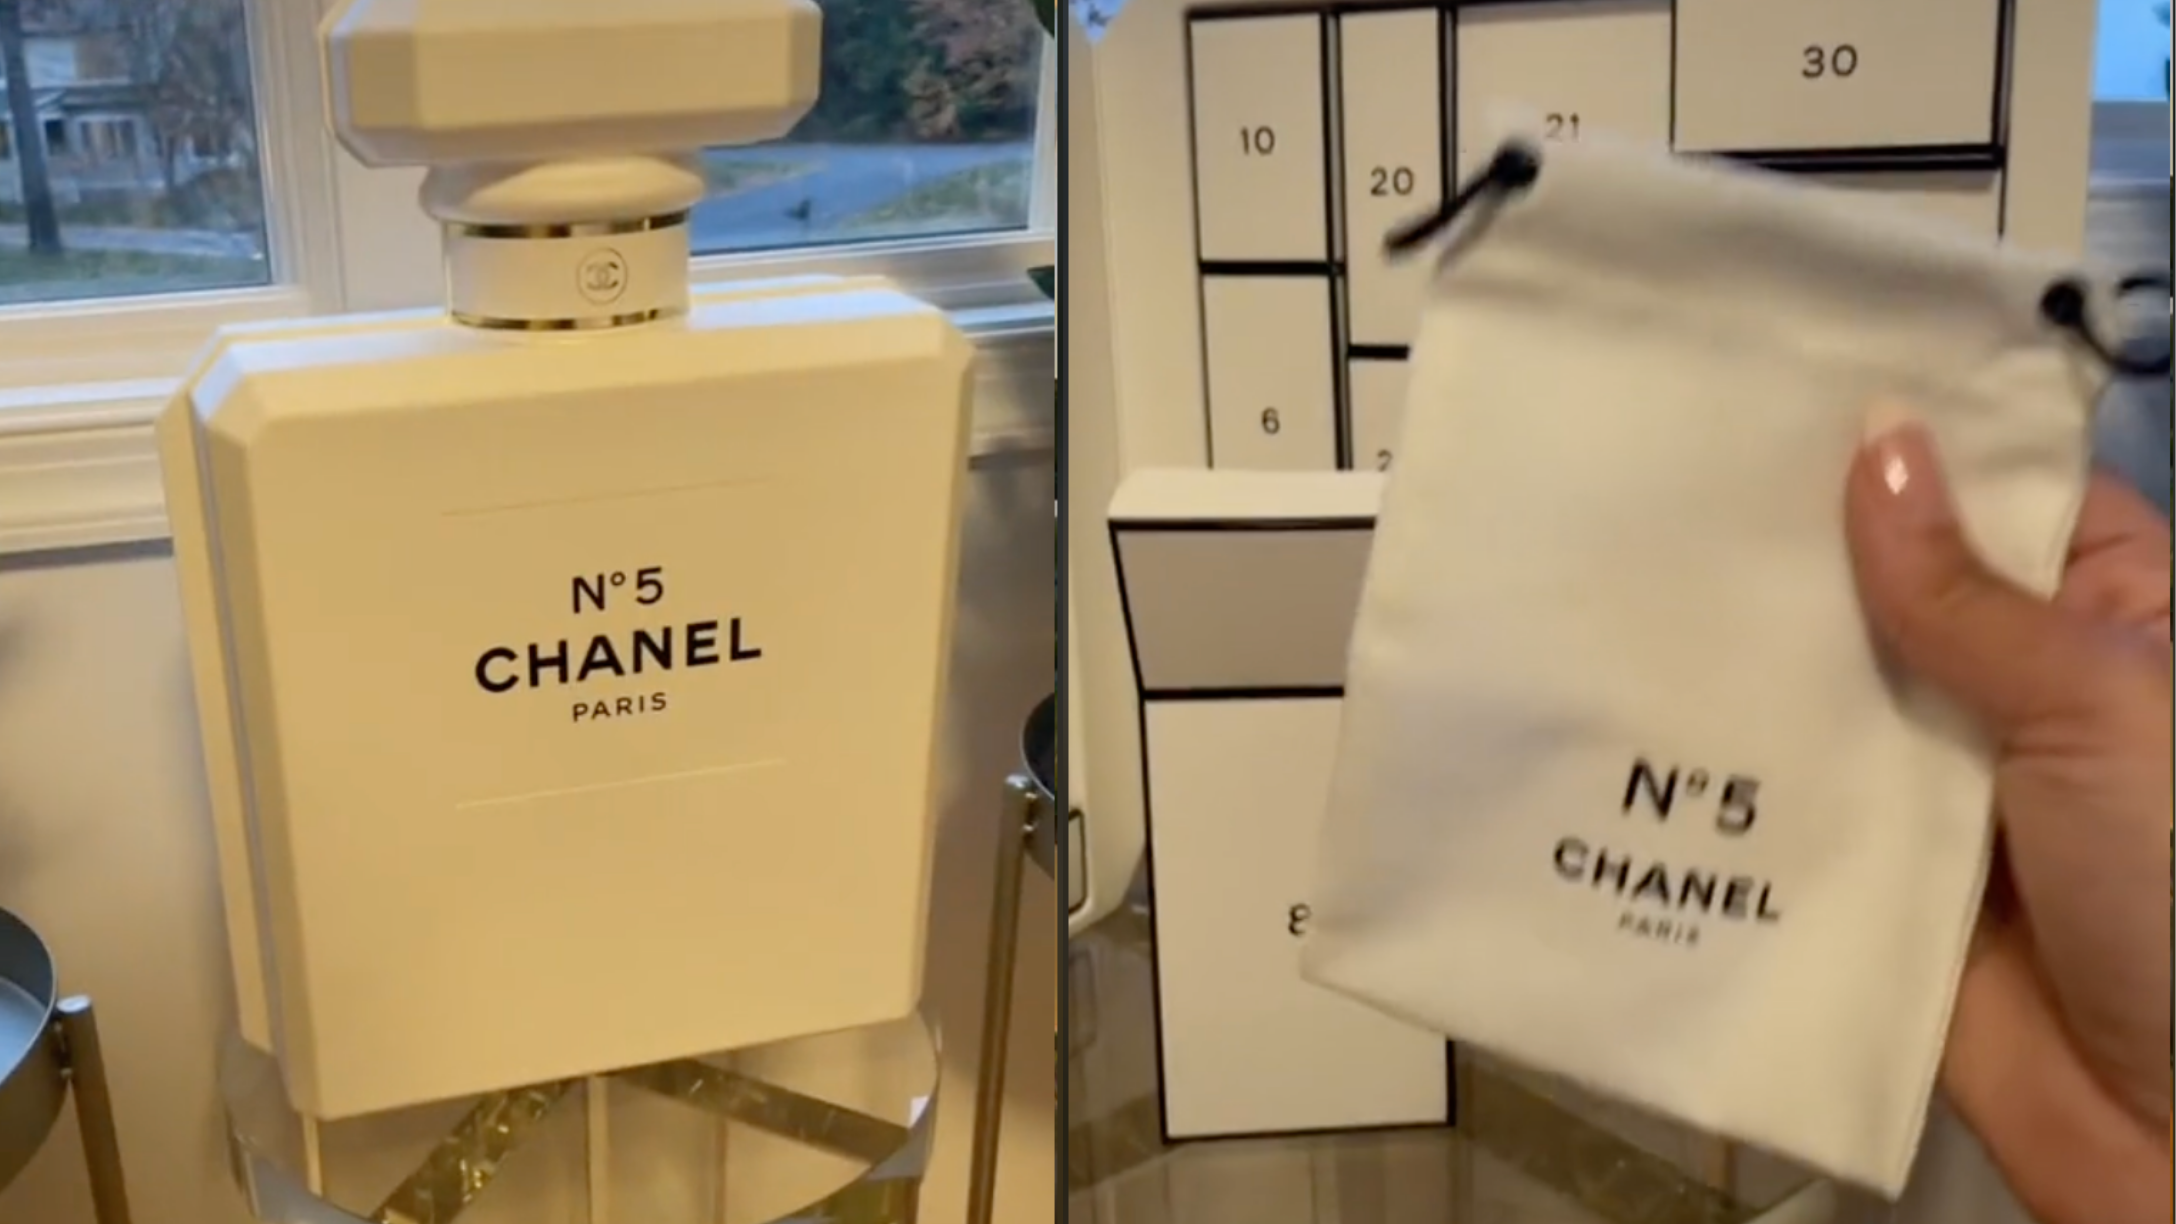 TikToker who spent $825 on Chanel Advent Calendar Can't Get